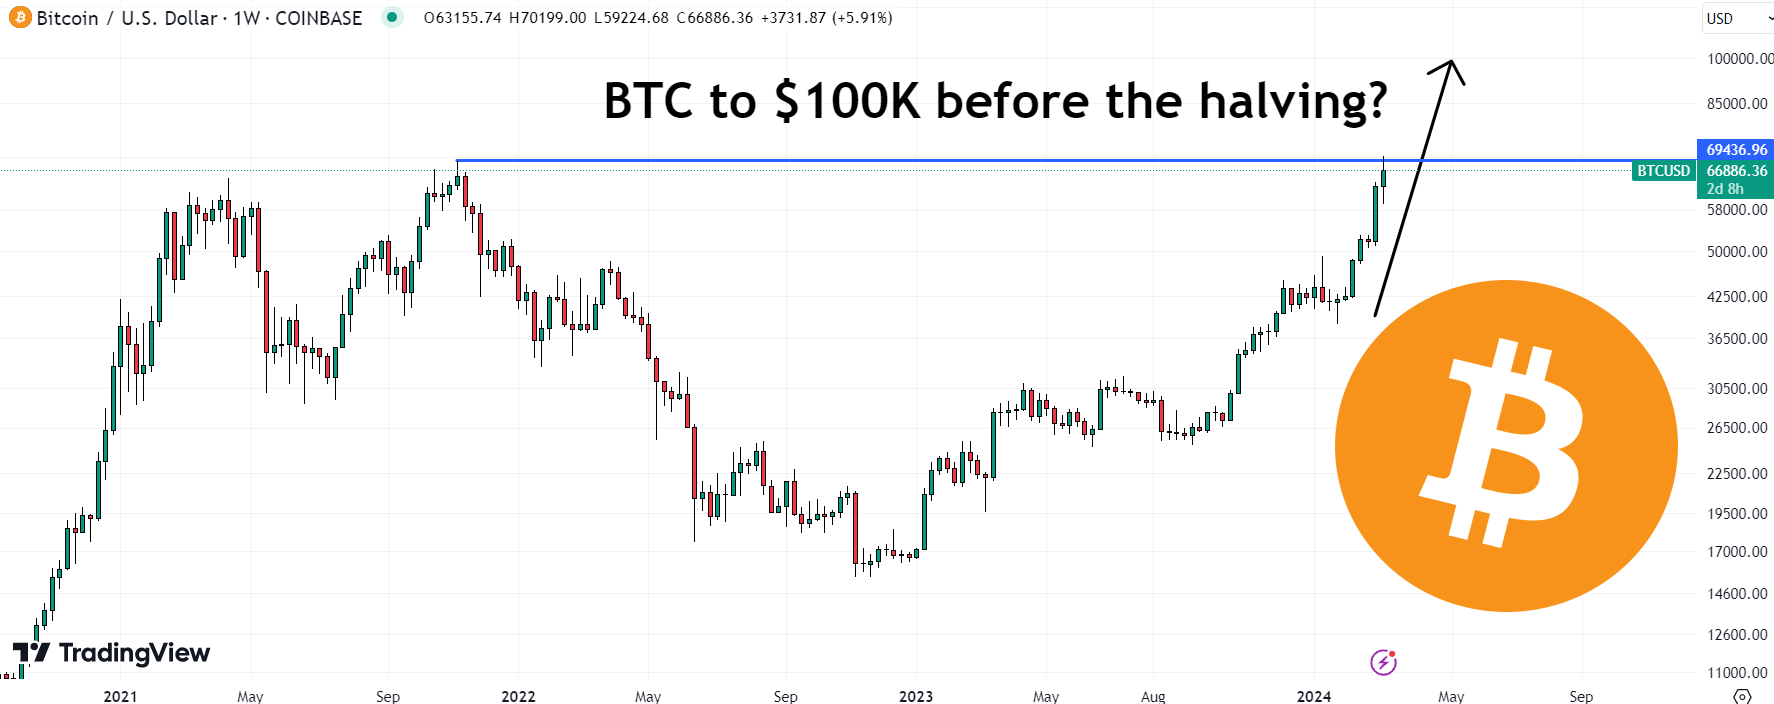 Can the Bitcoin price hit $100K ahead of the halving? Source: TradingView